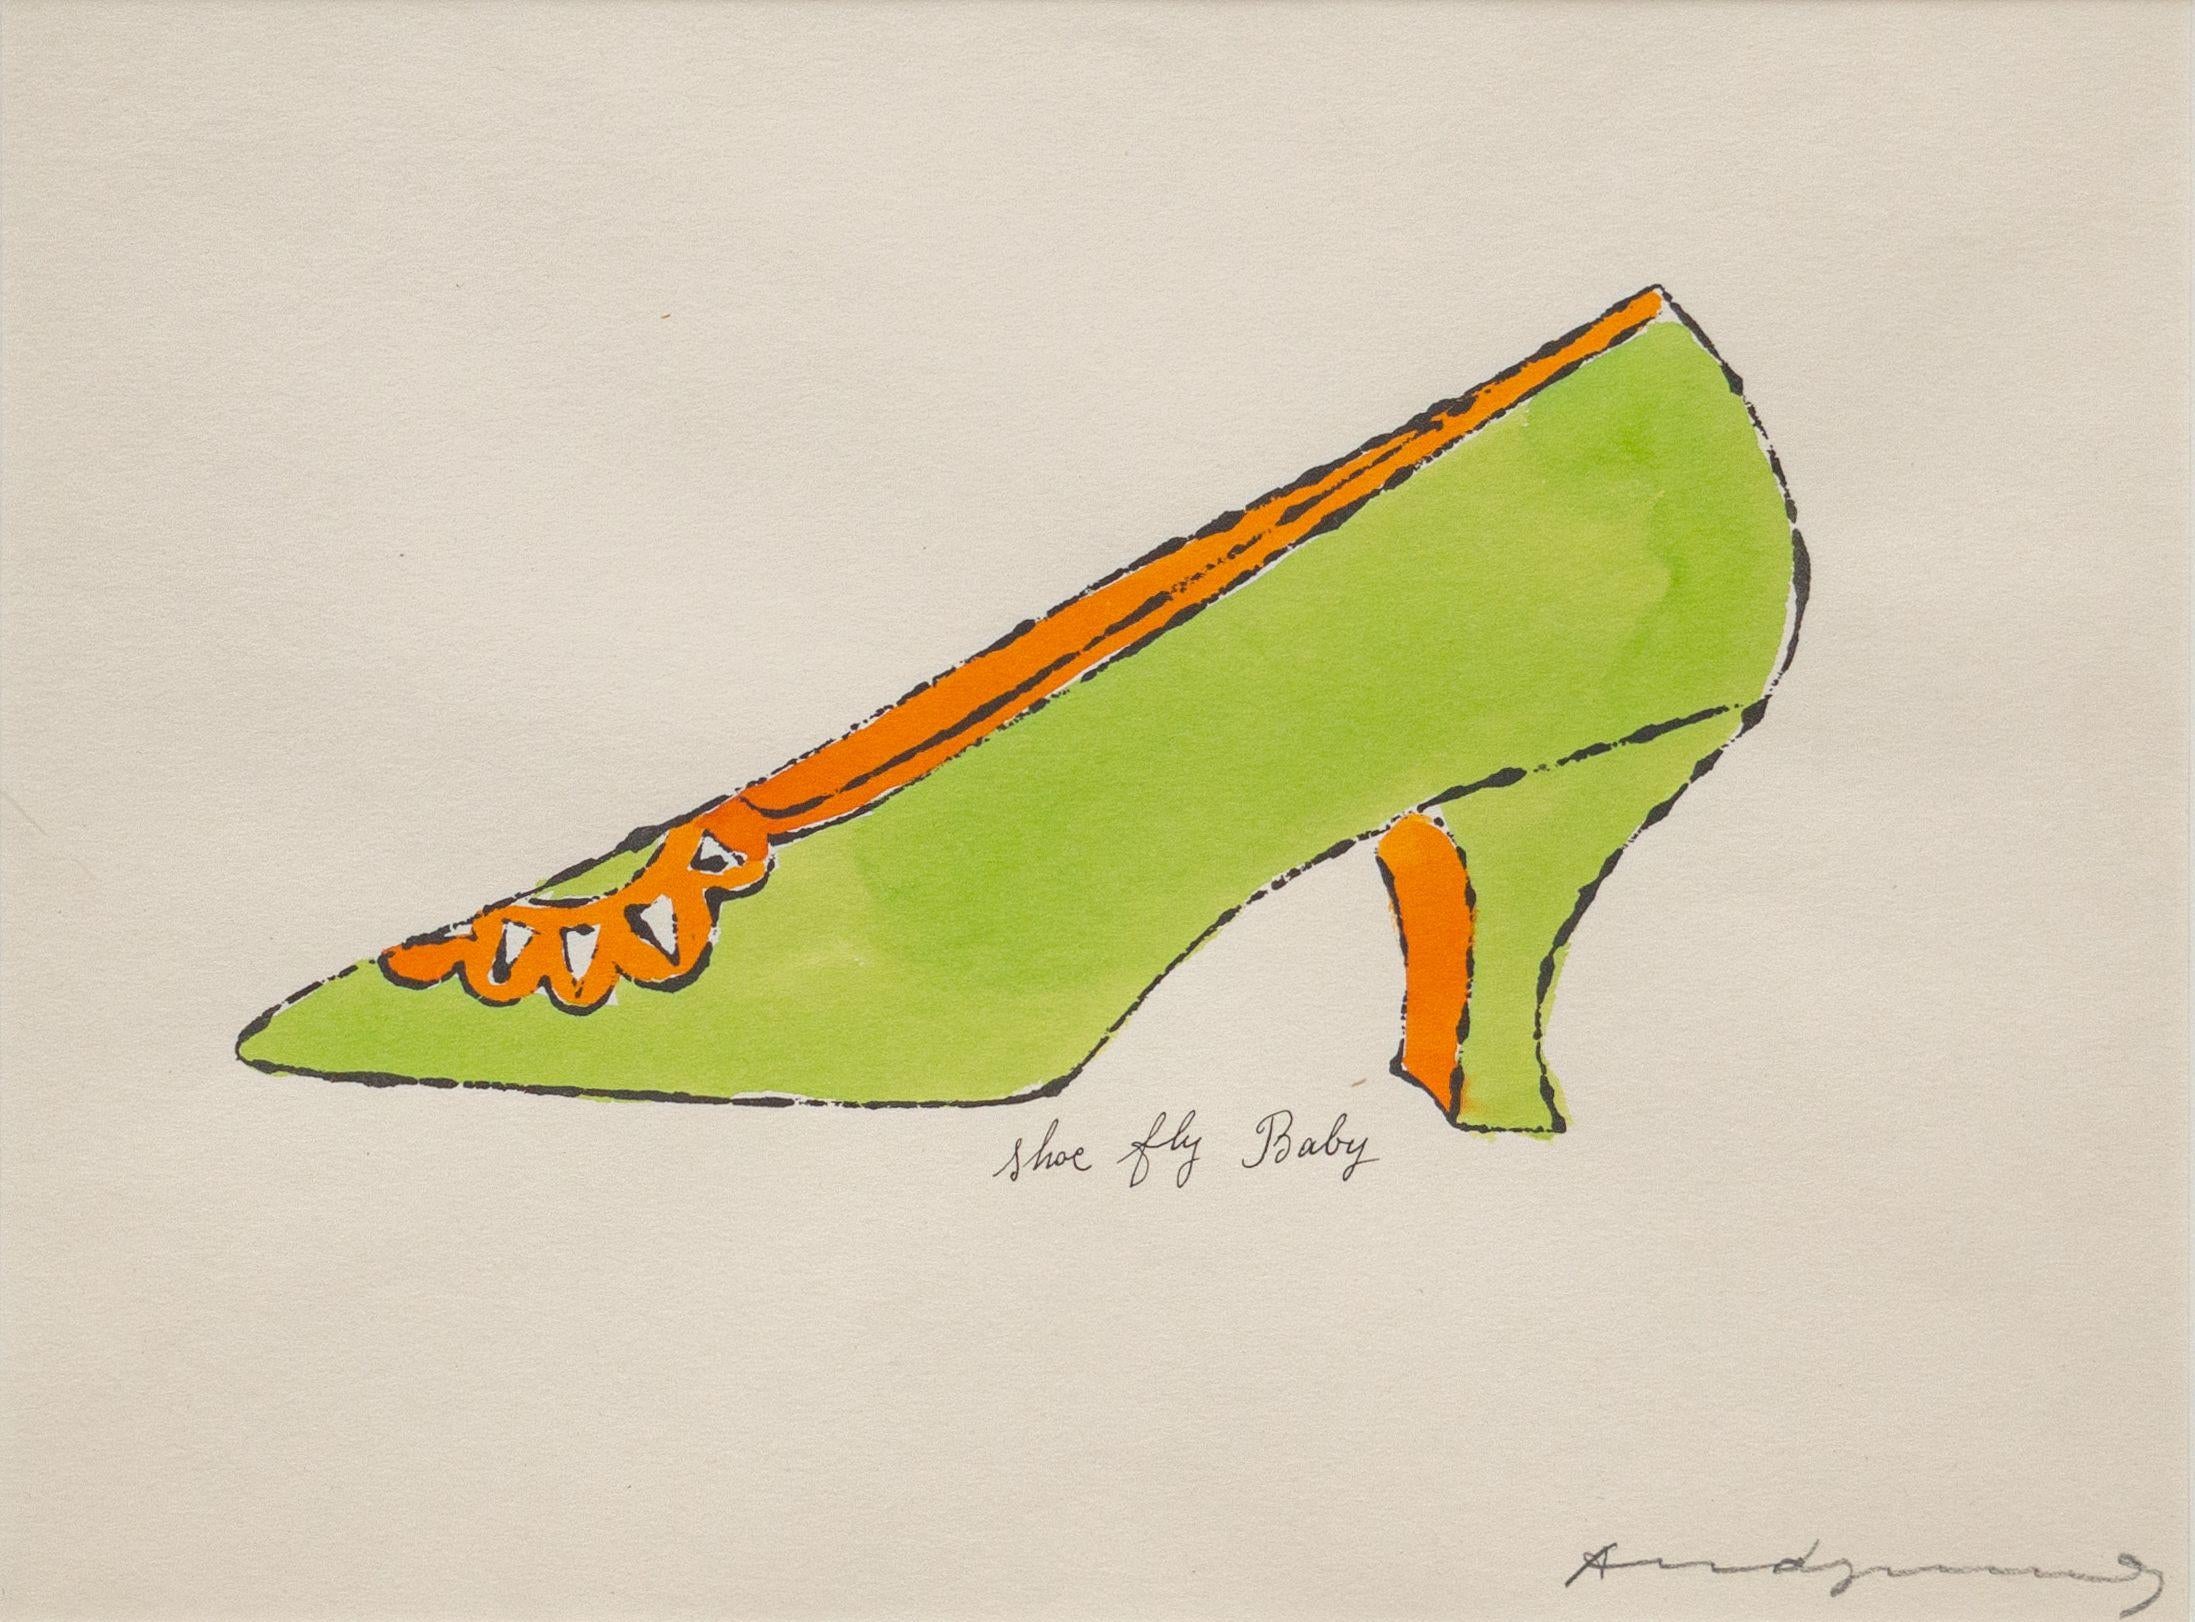 ANDY WARHOL (1928-1987)

Andy Warhol's 'Shoe Fly Baby' from A La Recherche du Shoe Perdu is an offset lithograph and watercolor on paper conceived in 1955. It is signed in pencil with full margins, measuring 9 3/4 x 13 3/4 in. This beautiful piece